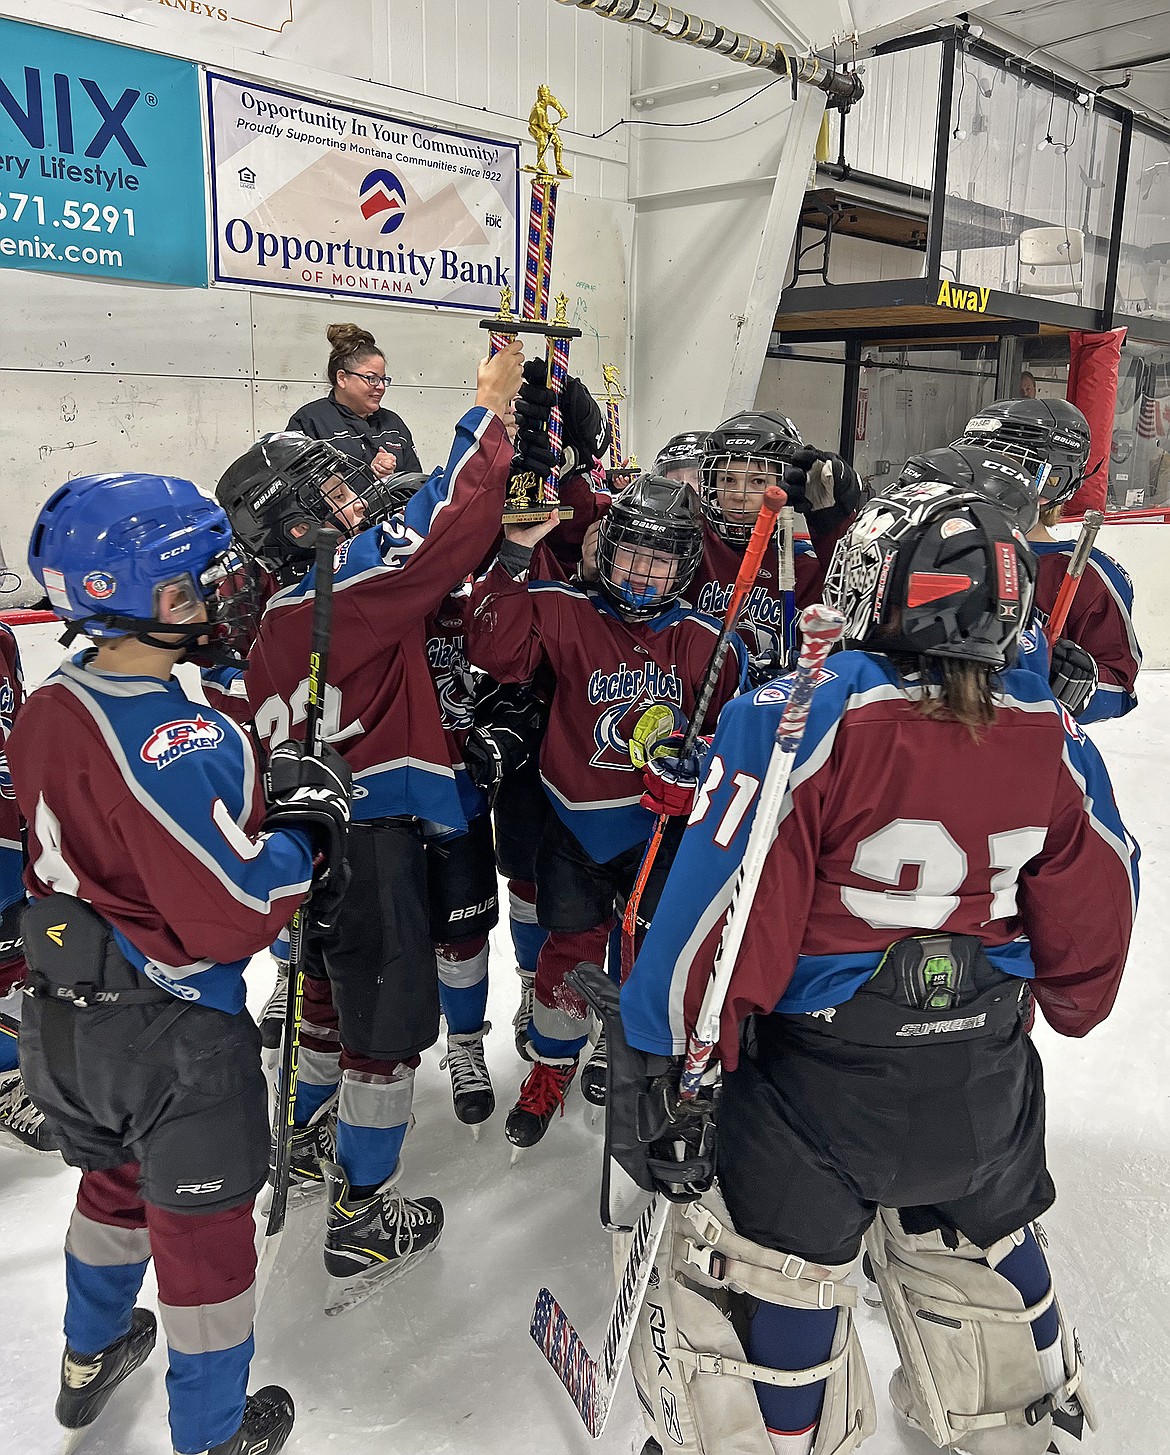 The Glacier Avalanche Squirts 10U hockey team took second place at the 2023 Montana Amateur Hockey Association State Championship in Billings last weekend. (Provided photo)